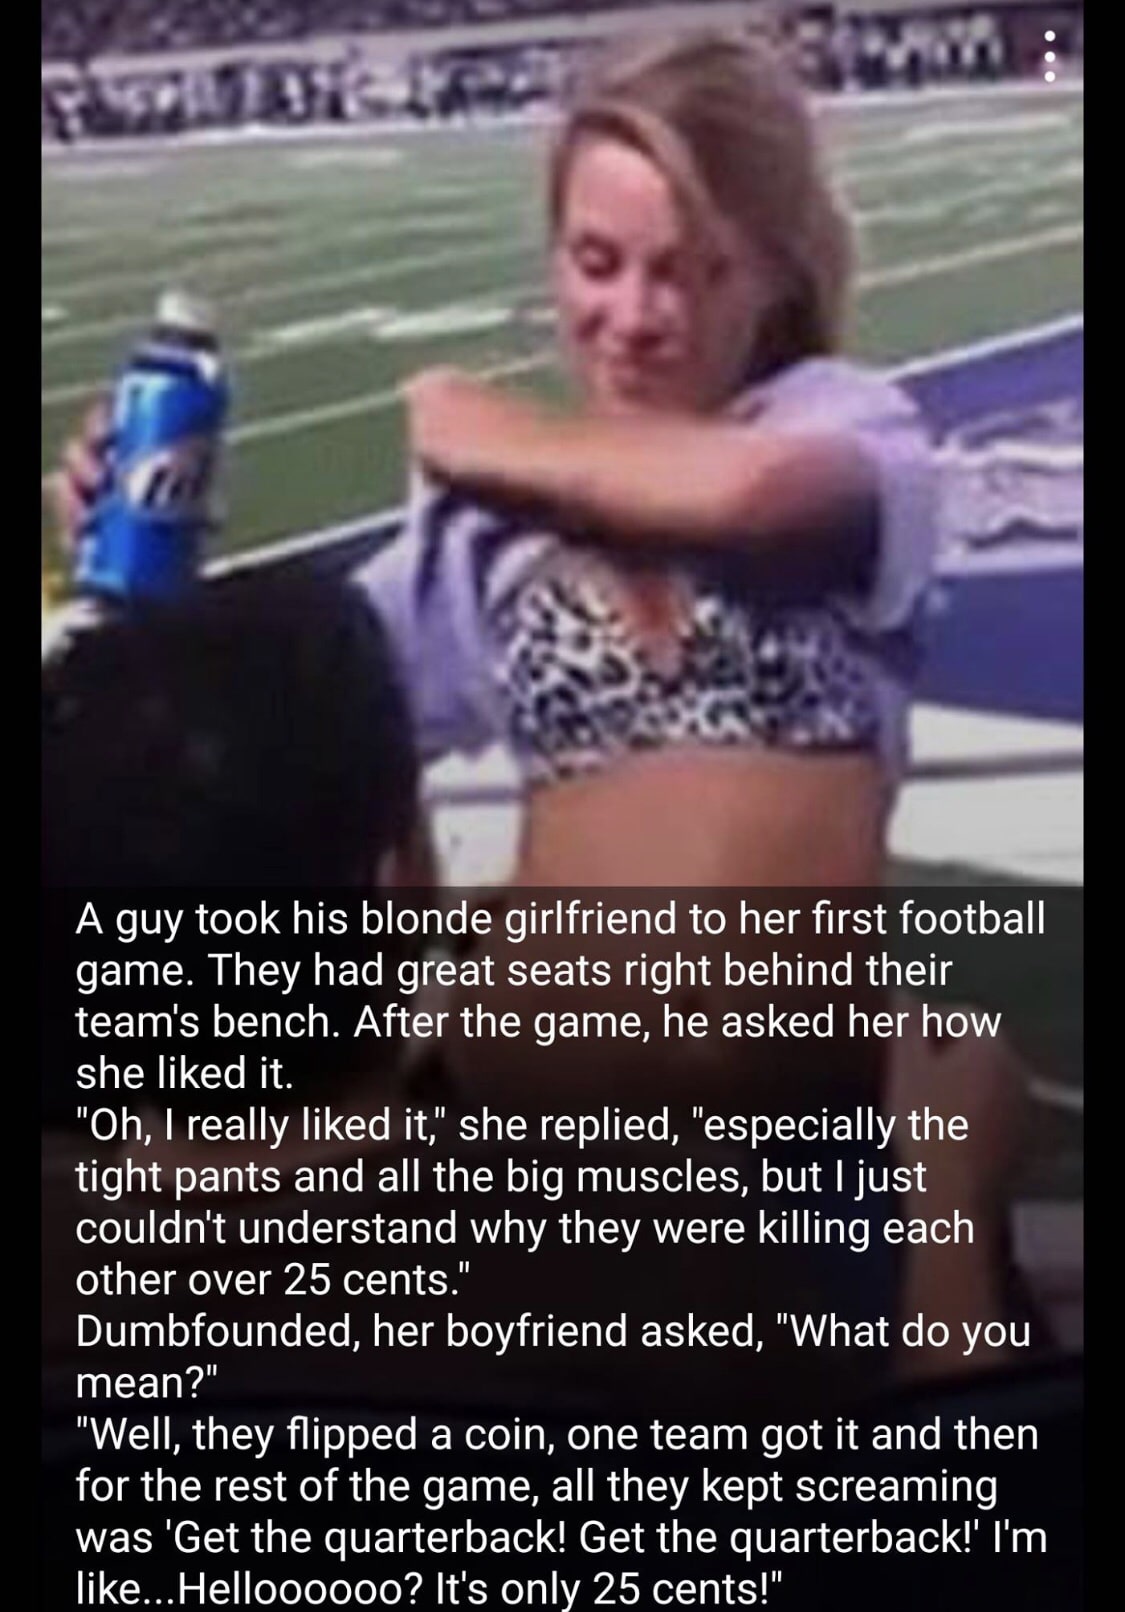 boomer boomer-memes boomer text: A guy took his blonde girlfriend to her first football game. They had great seats right behind their team's bench. After the game, he asked her how she liked it. 